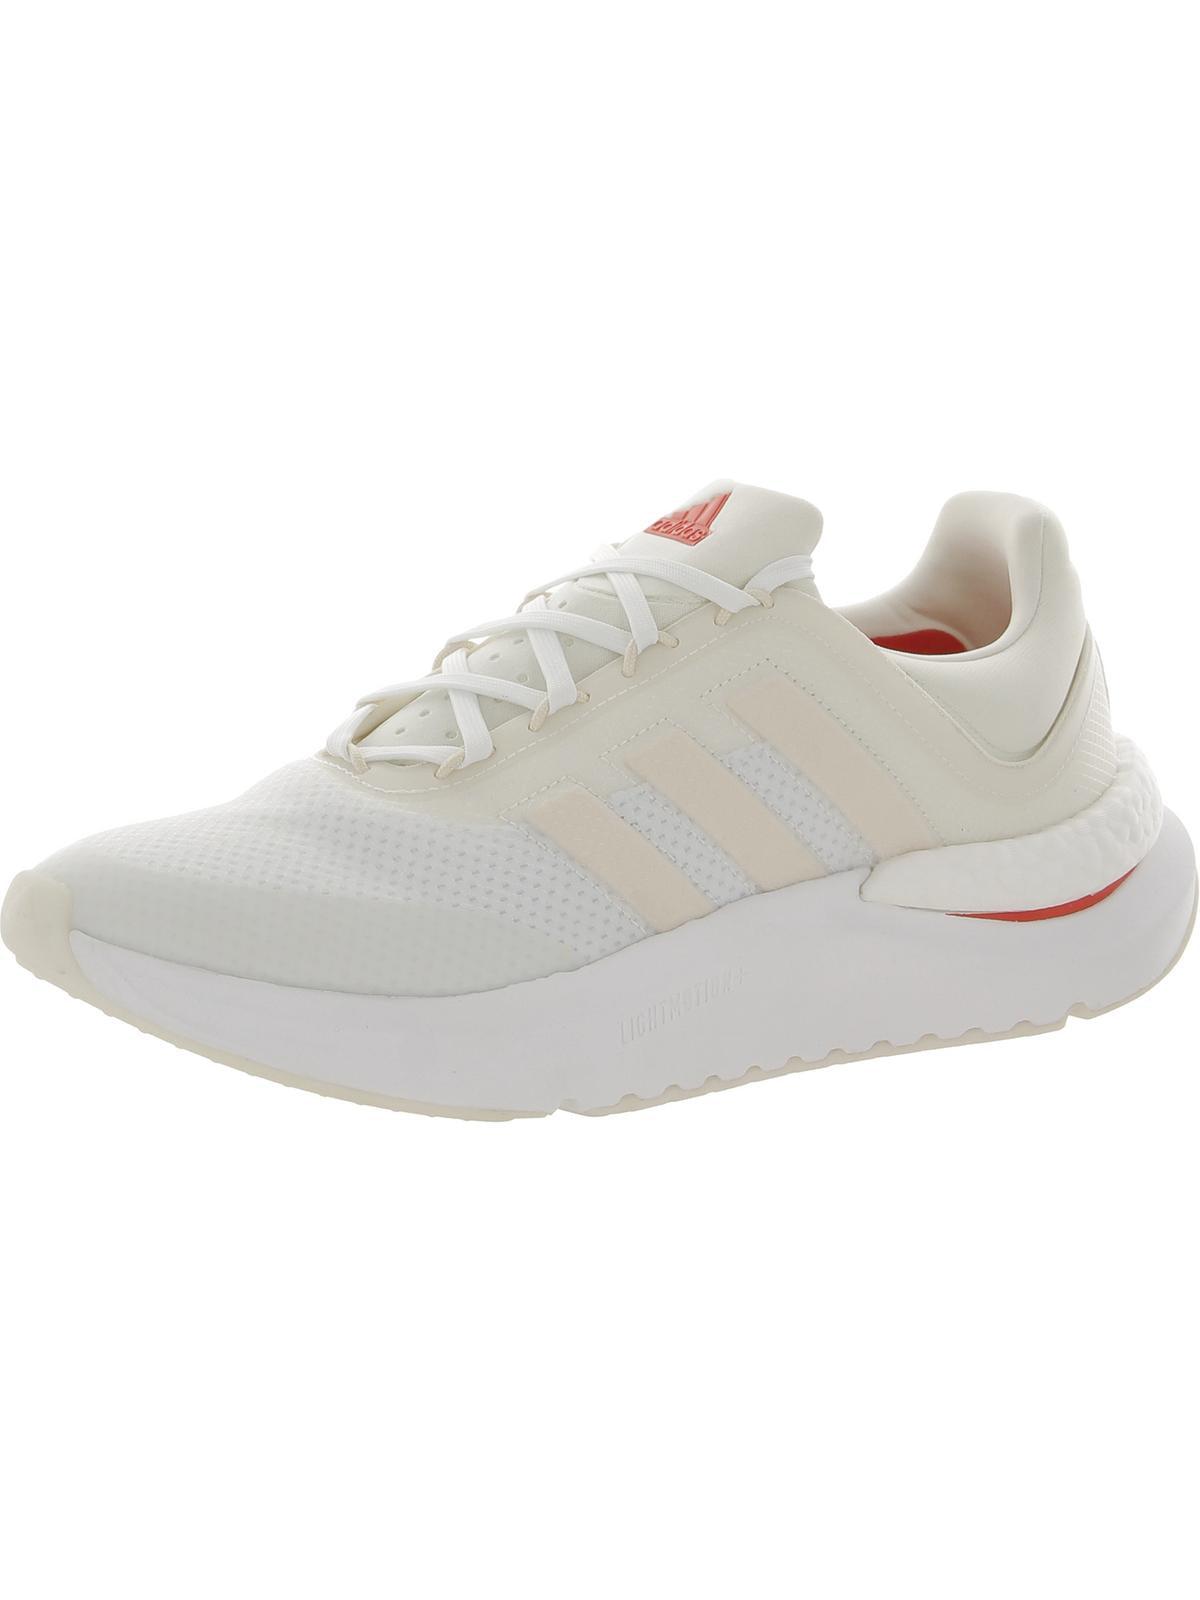 adidas Znsara Fitness Workout Running Shoes in White | Lyst